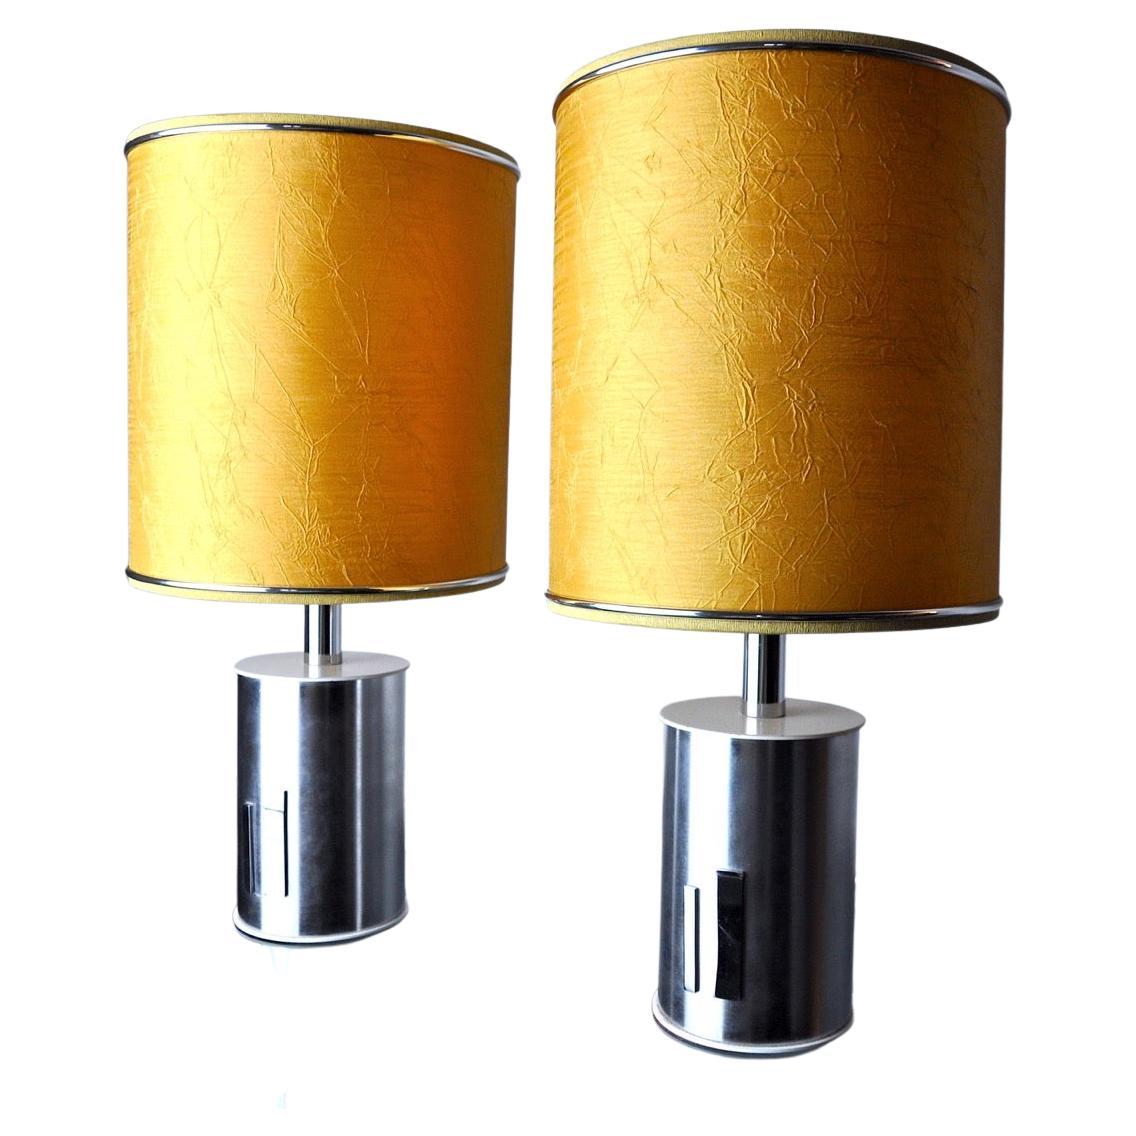 Pair of futuristic lamps by Marca SL, Spain, 1970s